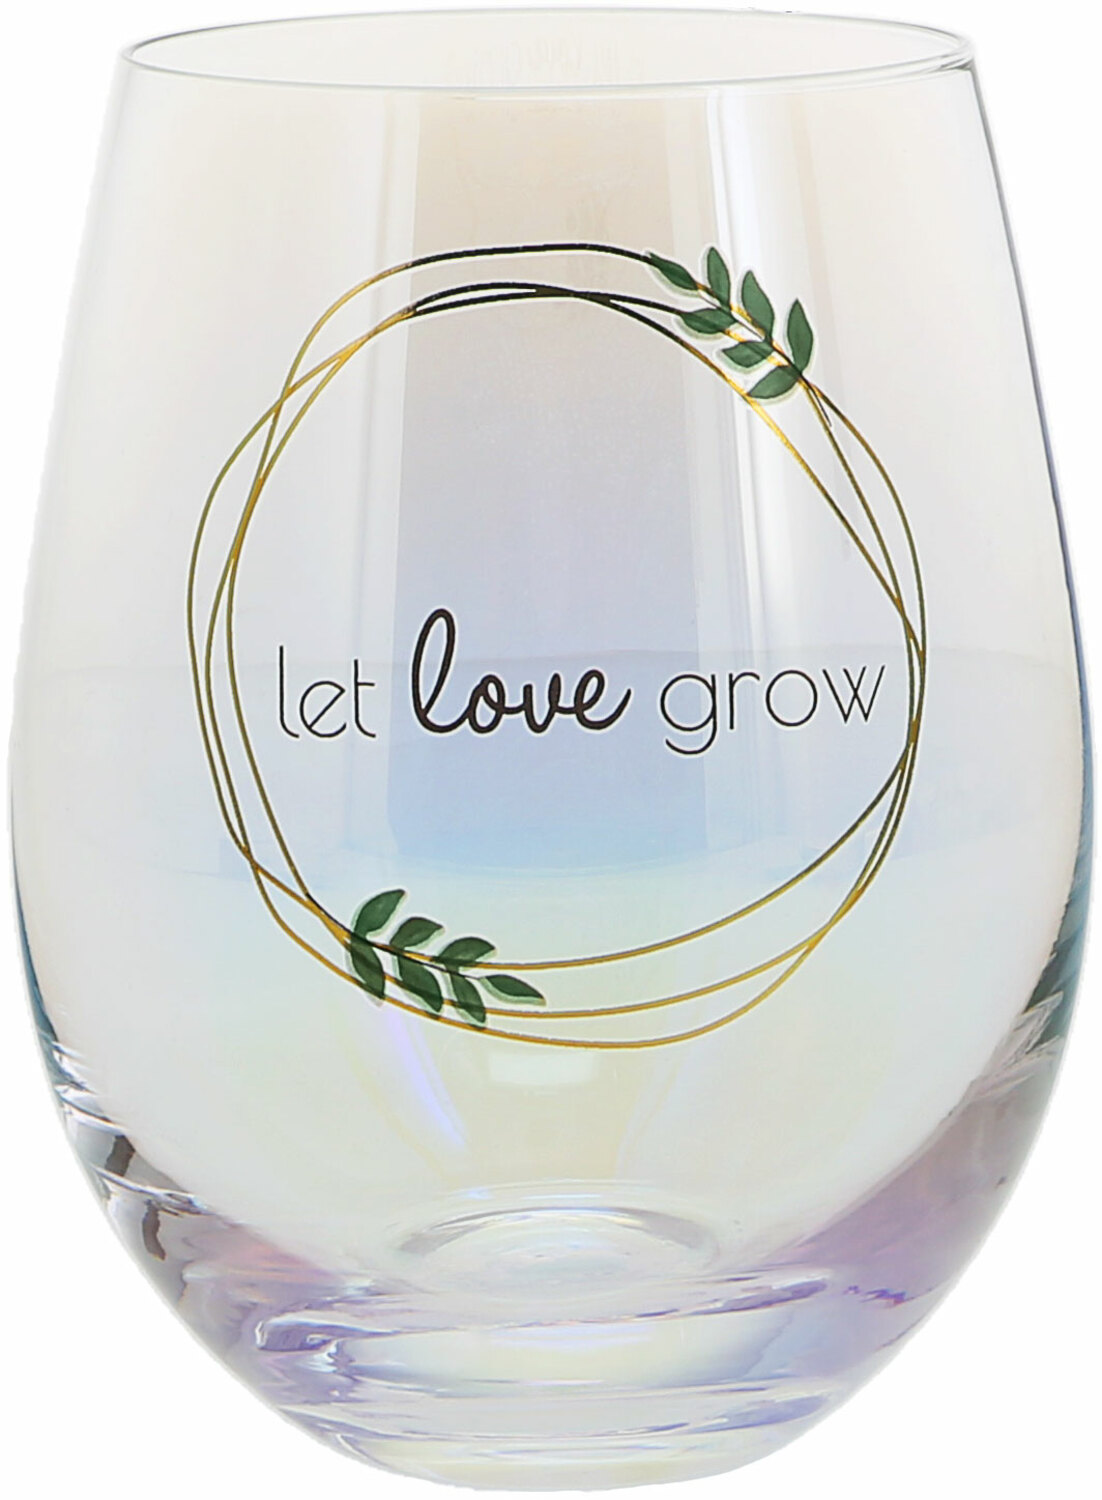 Let Love Grow by Love Grows - Let Love Grow - 18 oz Stemless Wine Glass